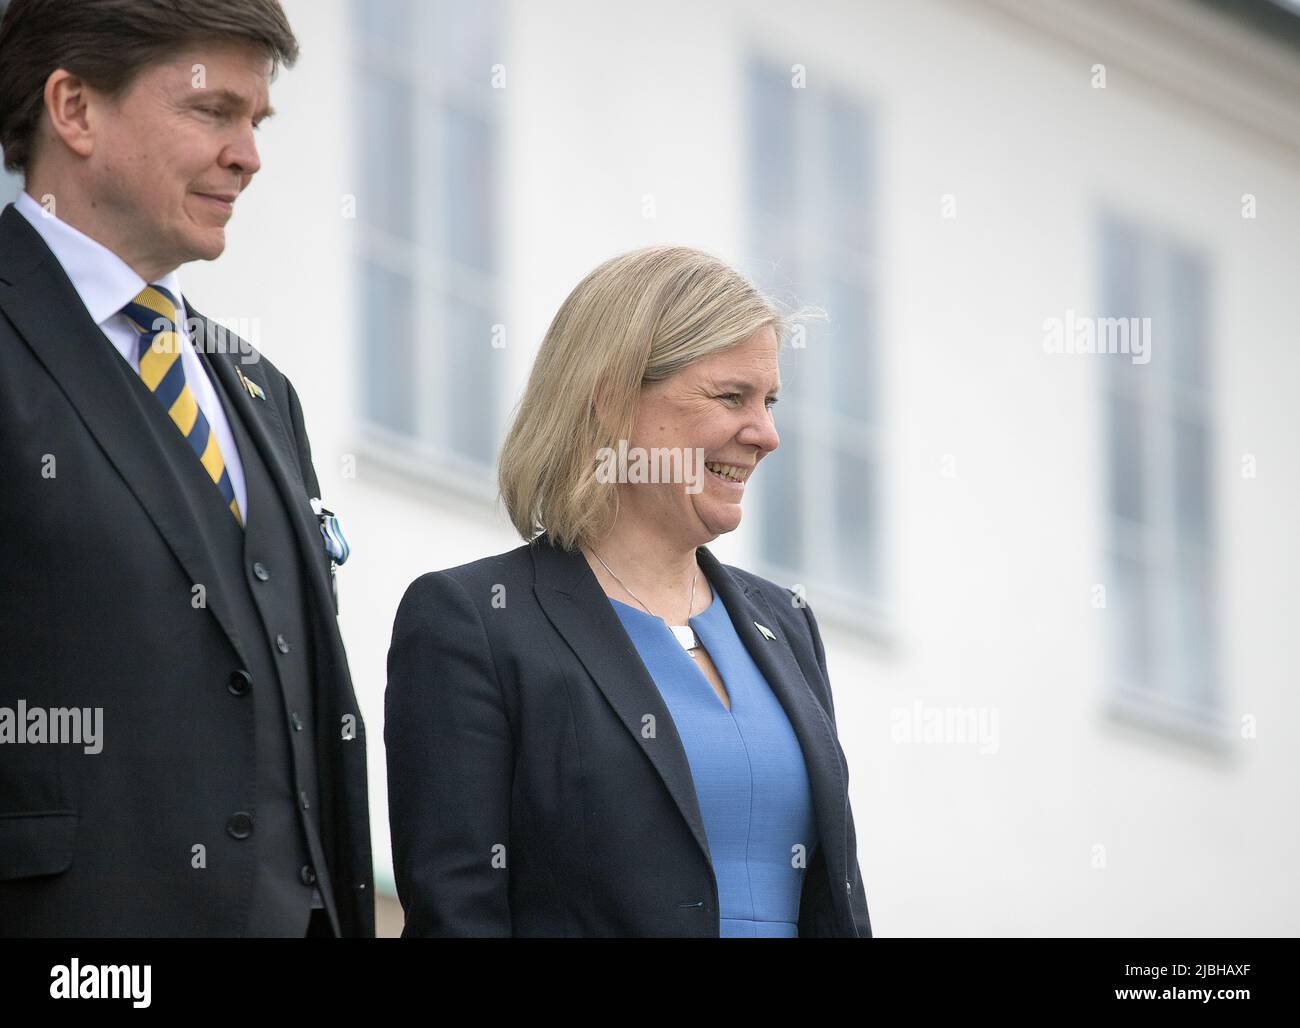 Sweden has a new Prime Minister - Sweden's first female. Magdalena Andersson socialist party and spokesman of parlament Andreas Norlén at veteran day, Stock Photo